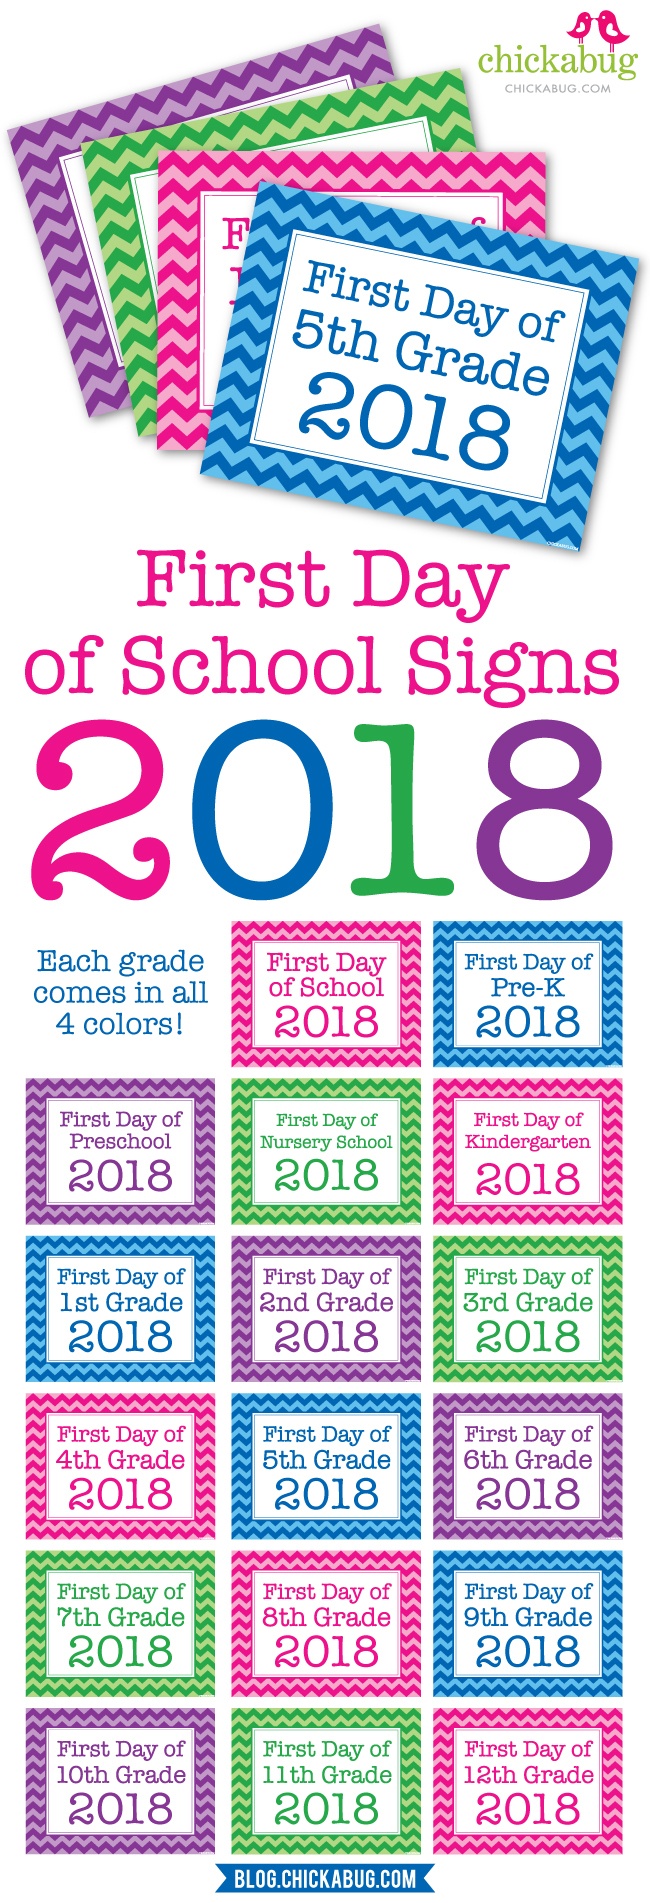 Free Printable First Day Of School Signs For 2018 | Chickabug - Free Printable First Day Of School Signs 2018